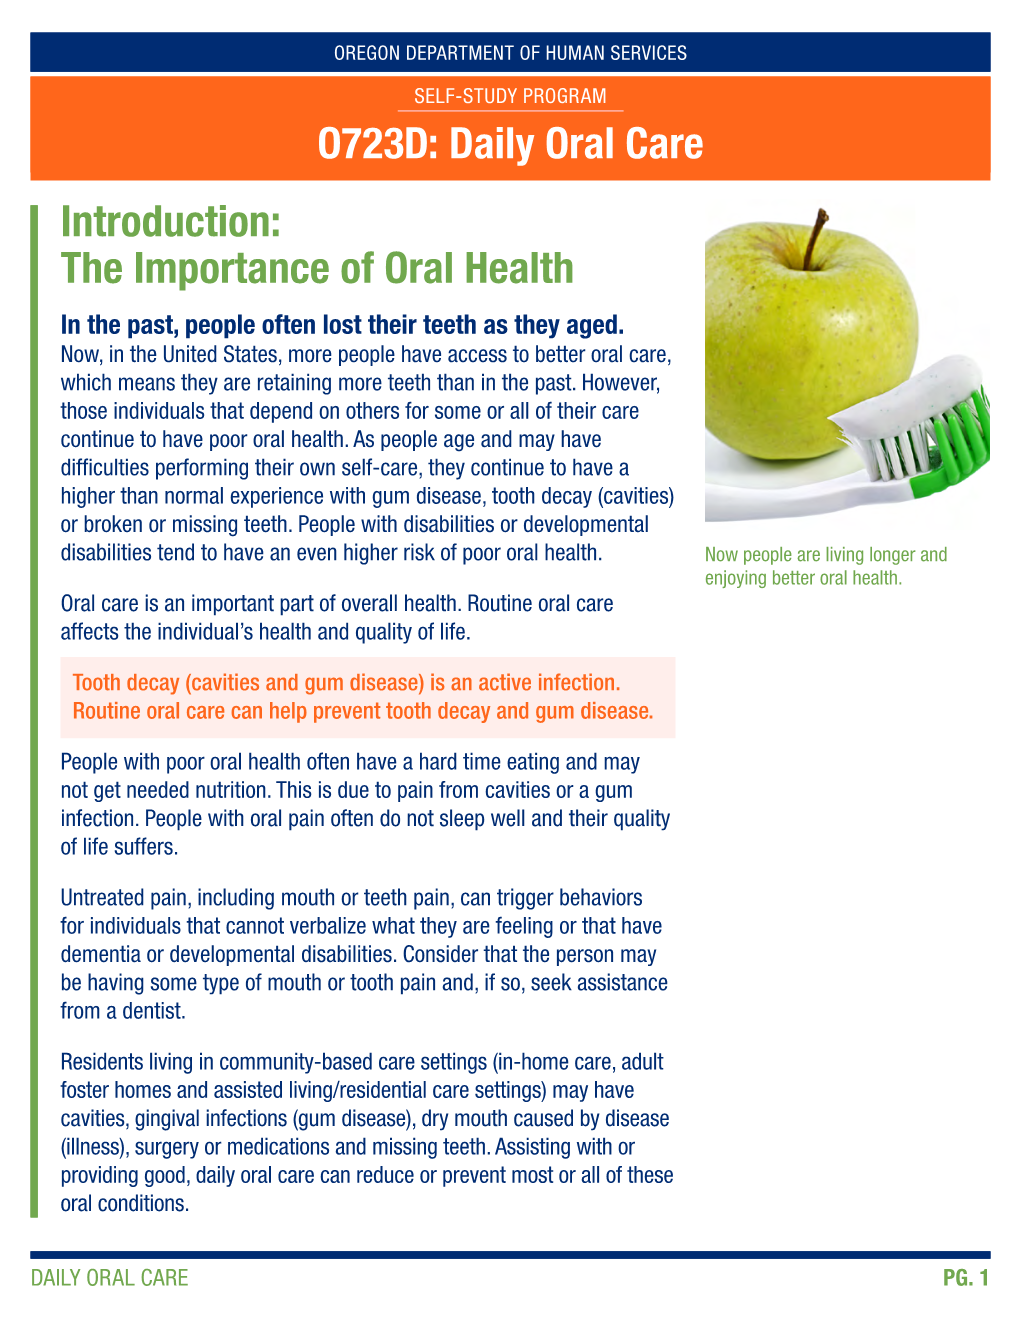 Daily Oral Care Can Reduce Or Prevent Most Or All of These Oral Conditions